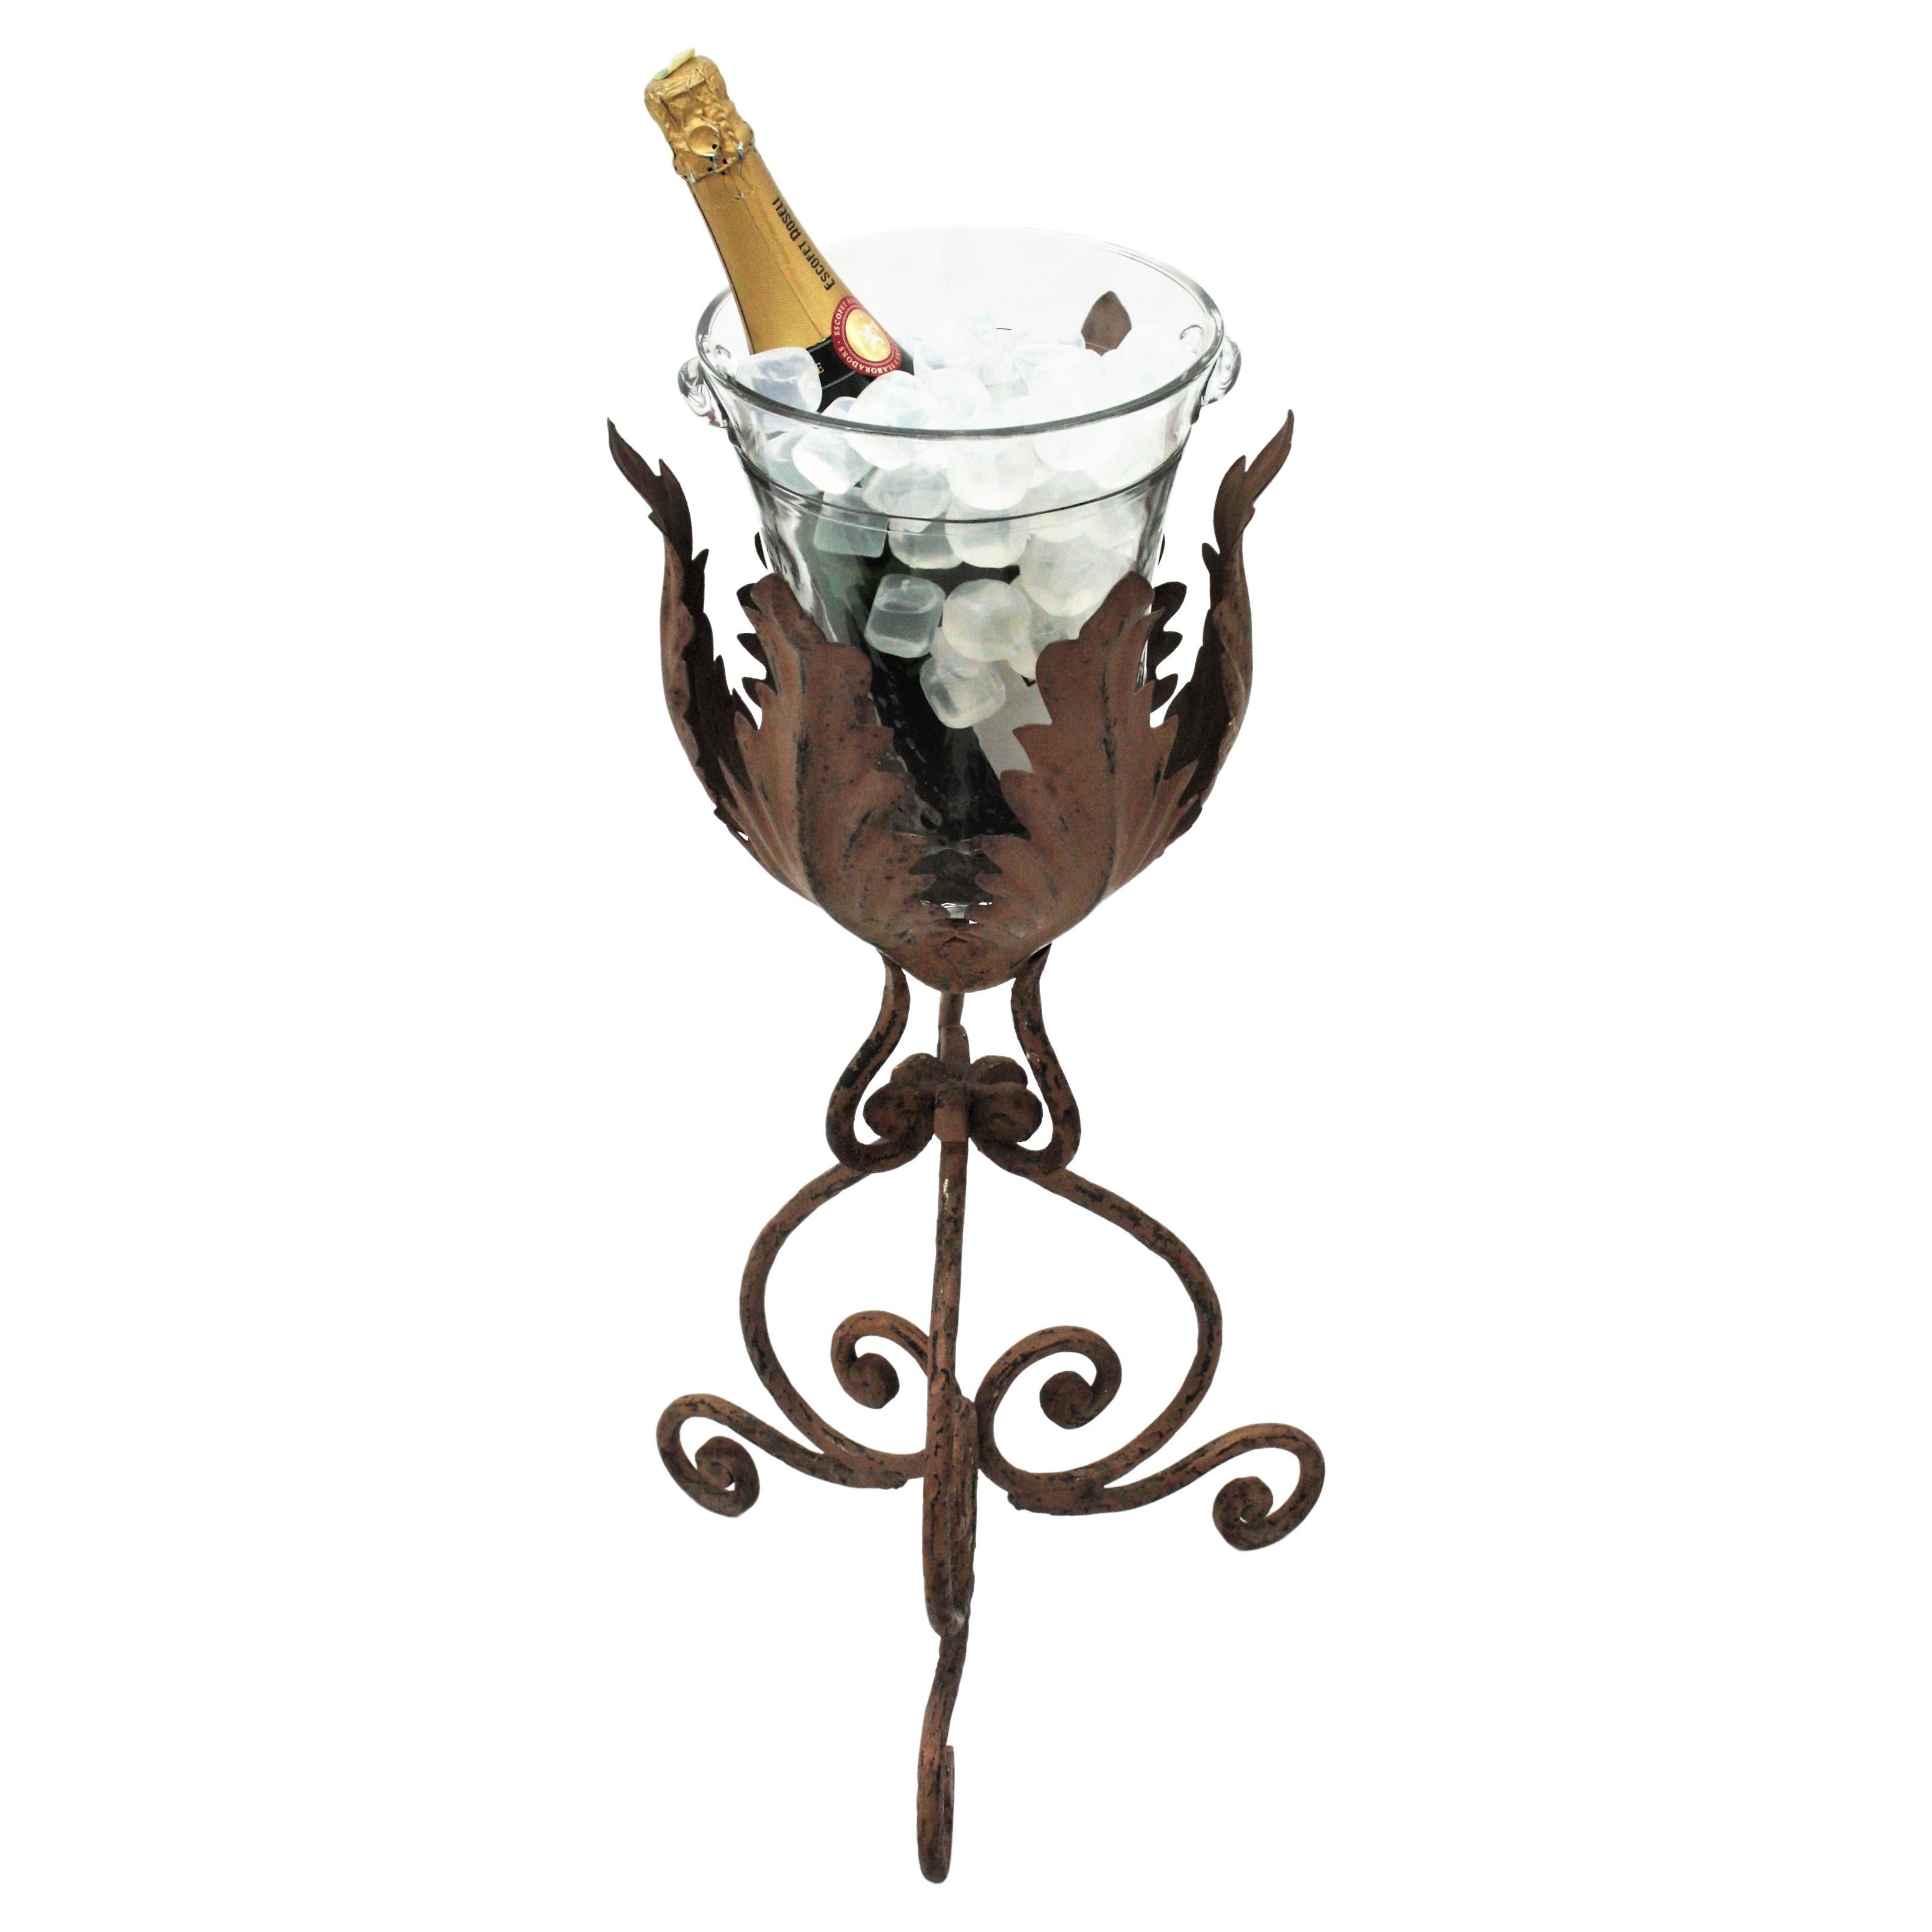 Spanish Champagne Wine Cooler Stand Ice Bucket / Drinks Stand, Wrought Iron